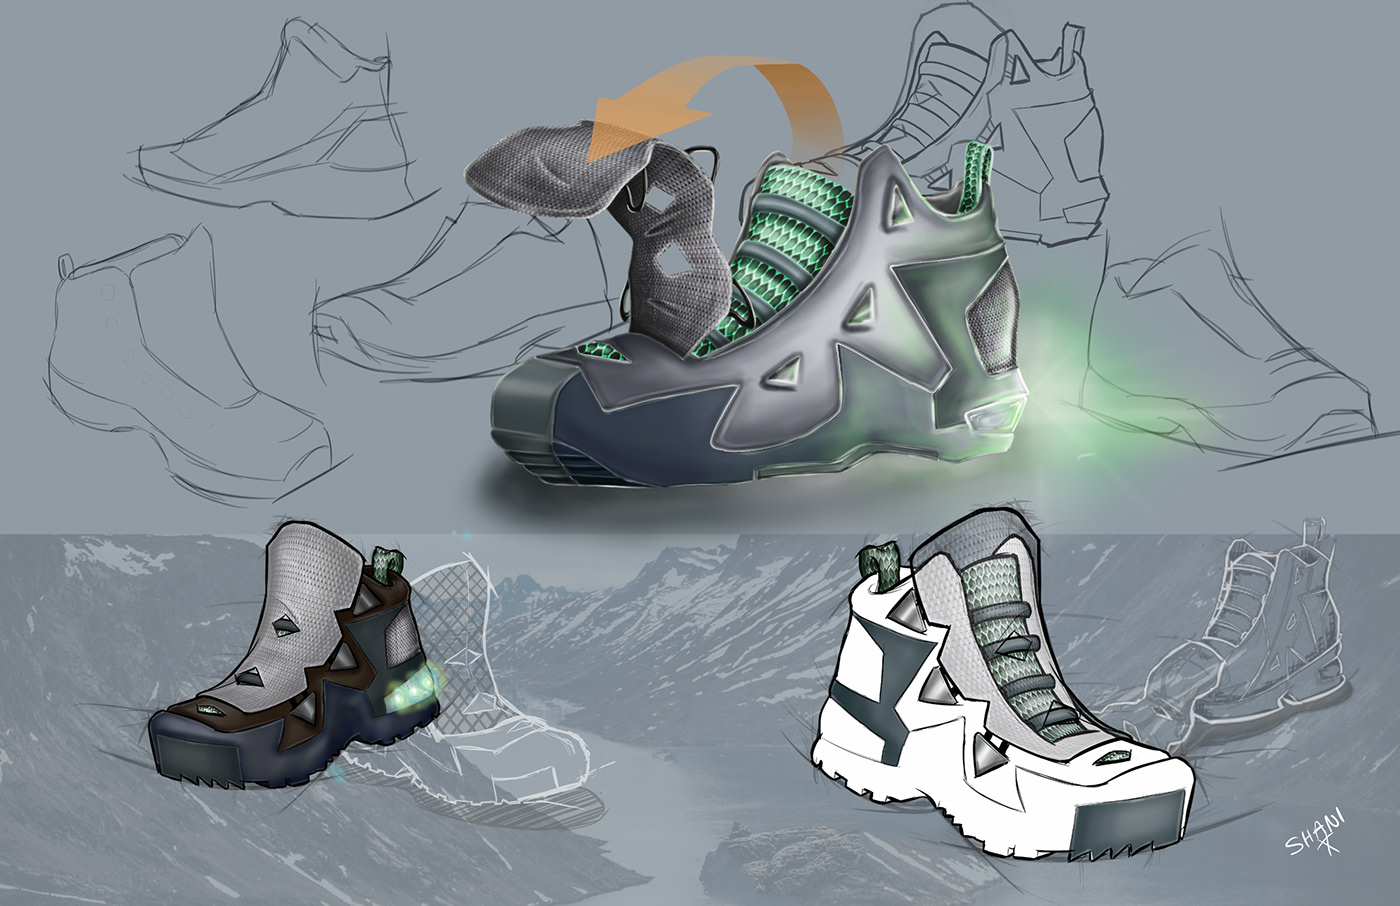 Solidworks ILLUSTRATION  sketching Prototyping OUTSOLE DESIGN shoe design Adobe Creative Cloud Solar Fabric Energy Generating Sustainability